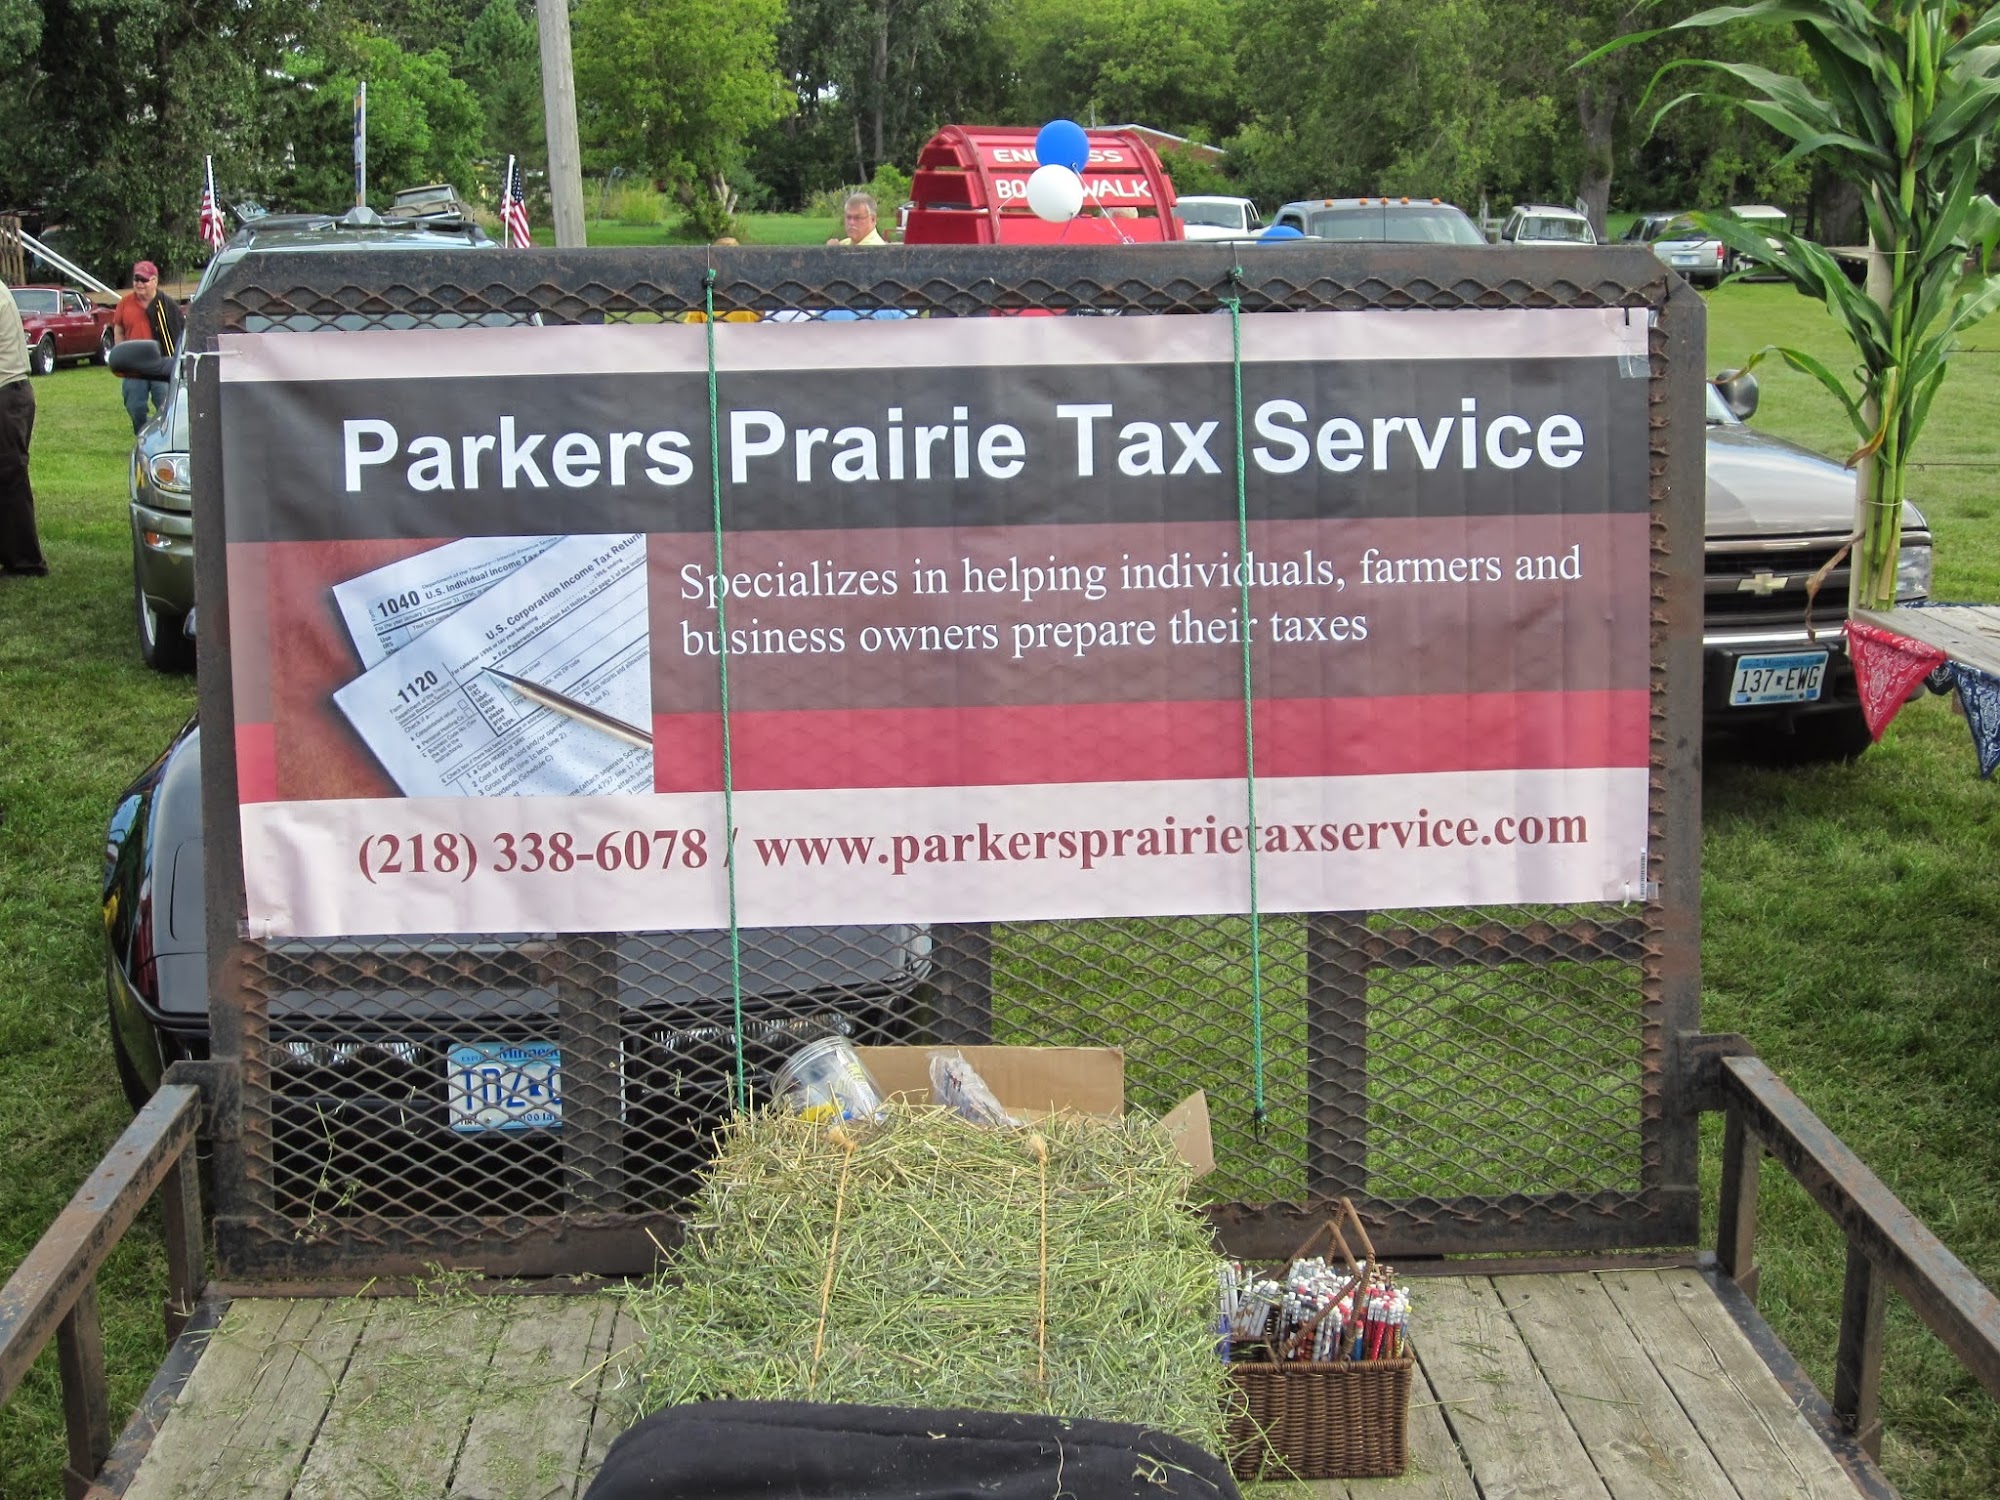 Parkers Prairie Tax Services 104 S Otter Ave, Parkers Prairie Minnesota 56361